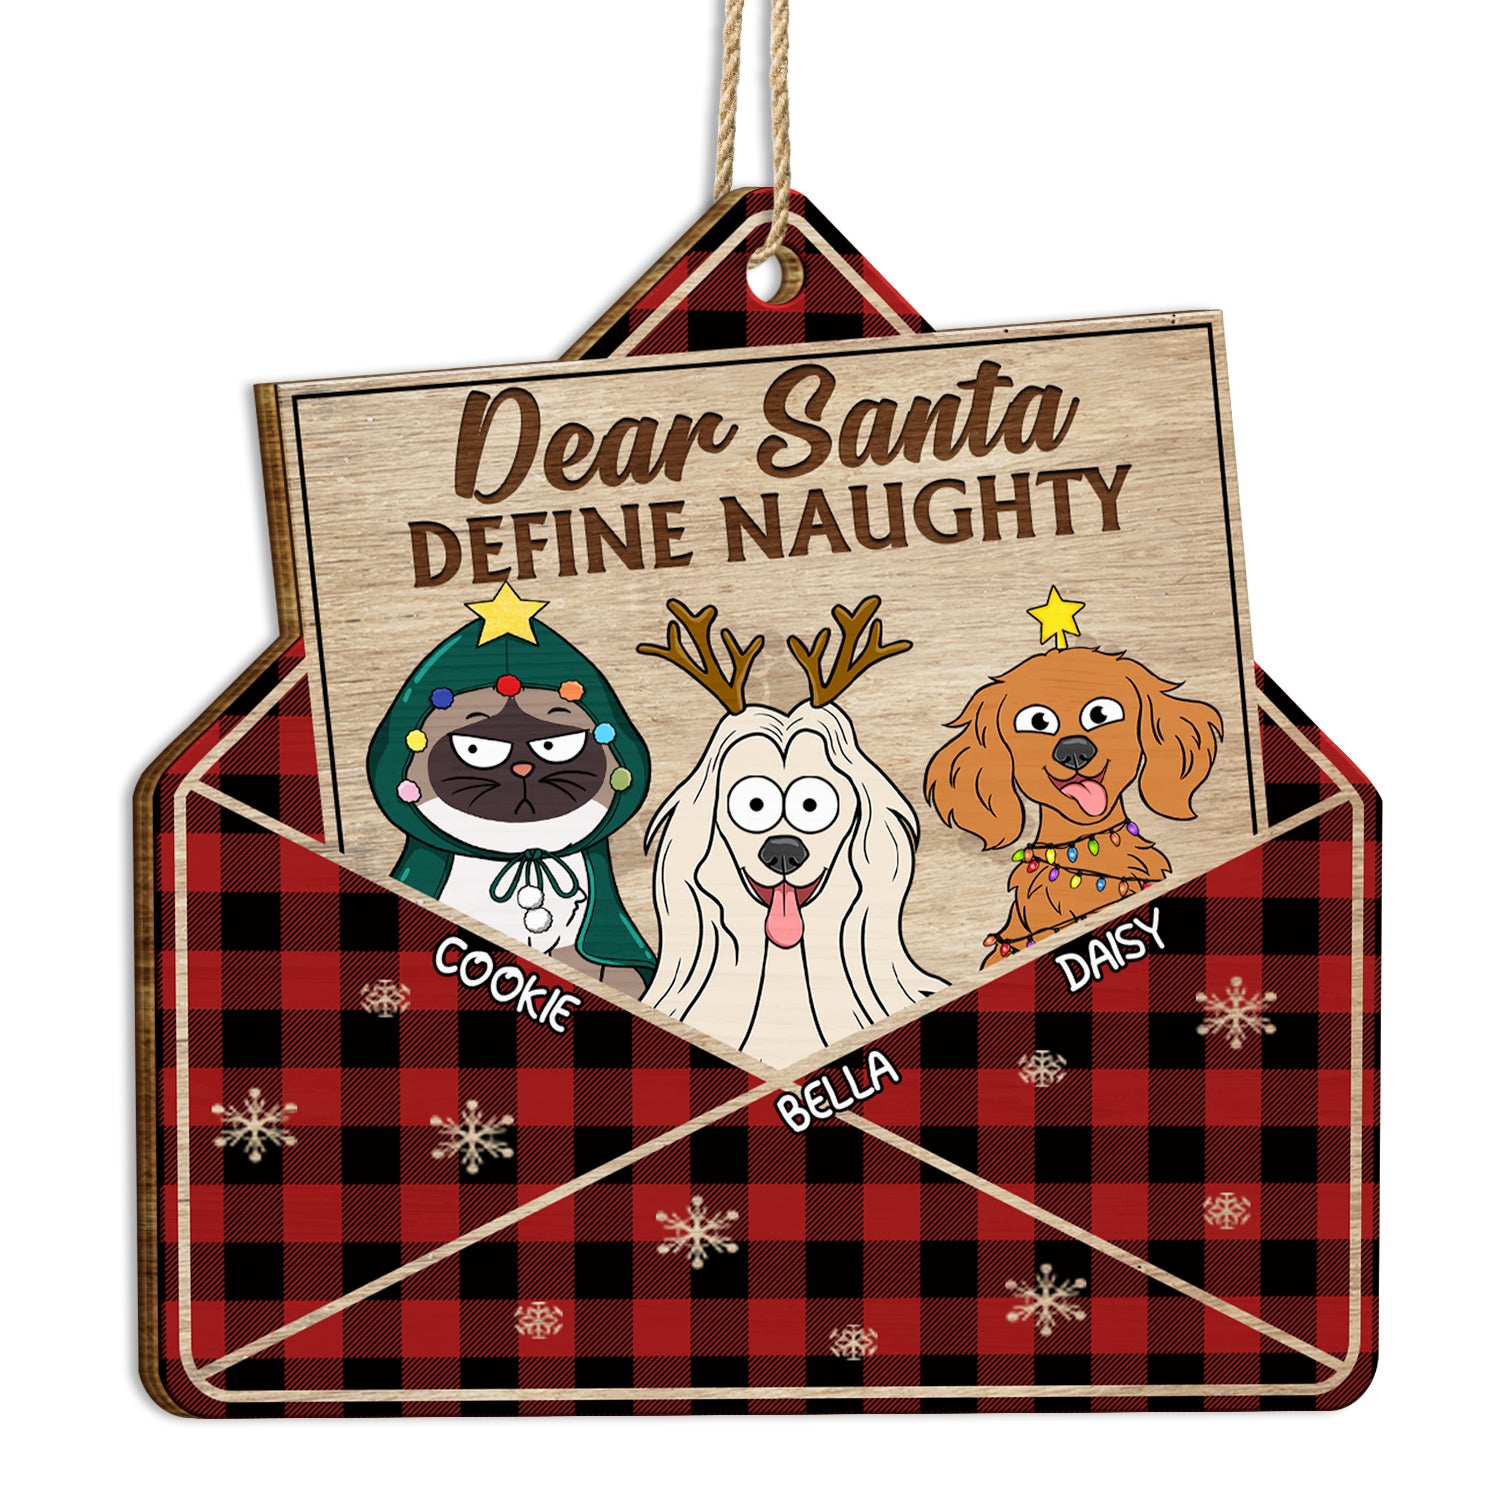 Dear Santa Define Naughty Funny Pet - Christmas Gifts For Dog Lovers, Cat Lovers - Personalized Custom Shaped Wooden Ornament